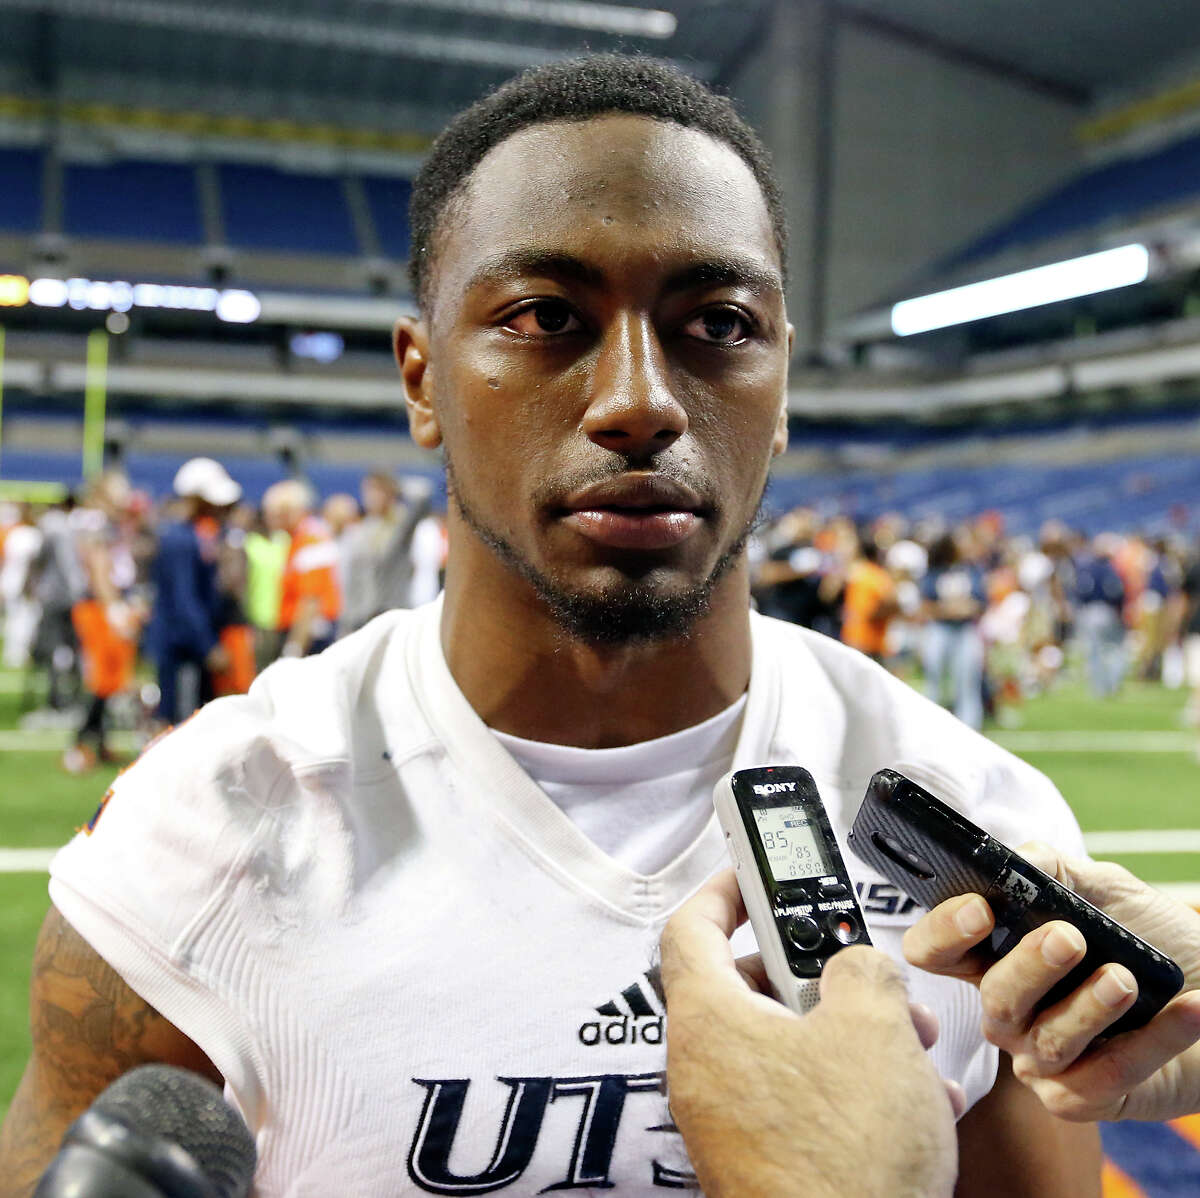 UTSA's Jarveon Williams answers questions from the media after the team's Football Fiesta Spring Game held Saturday April 18, 2015 at the Alamodome.